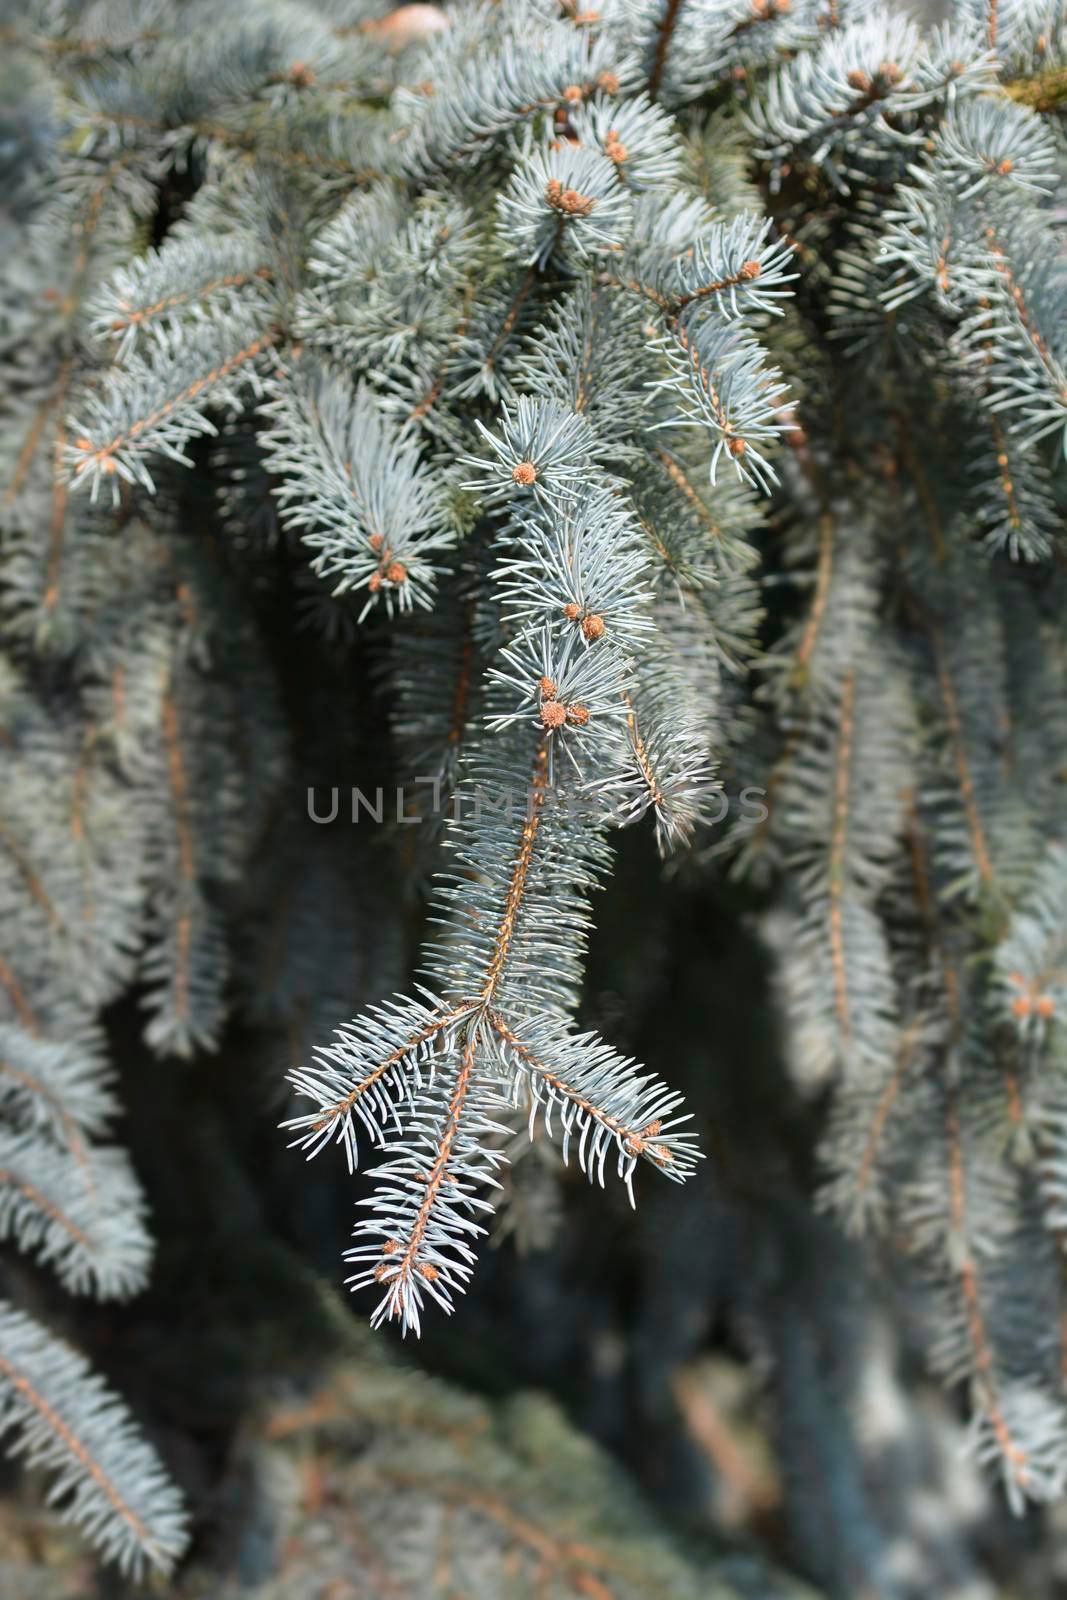 Colorado blue spruce - Latin name - Picea pungens